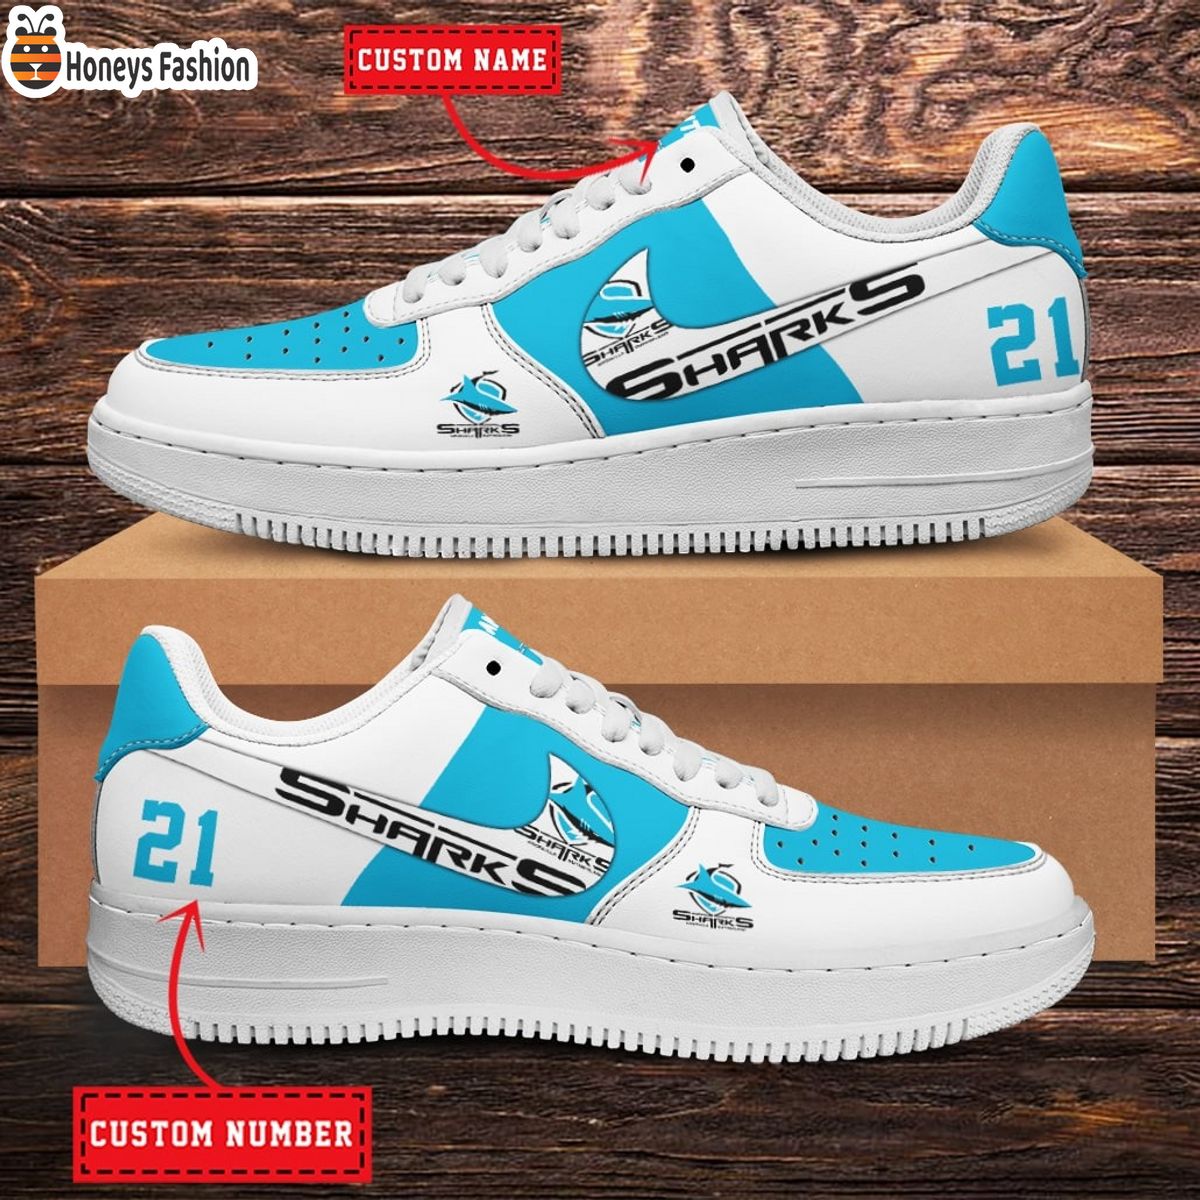 Cronulla-Sutherland Sharks NRL Personalized Air Force 1 Shoes